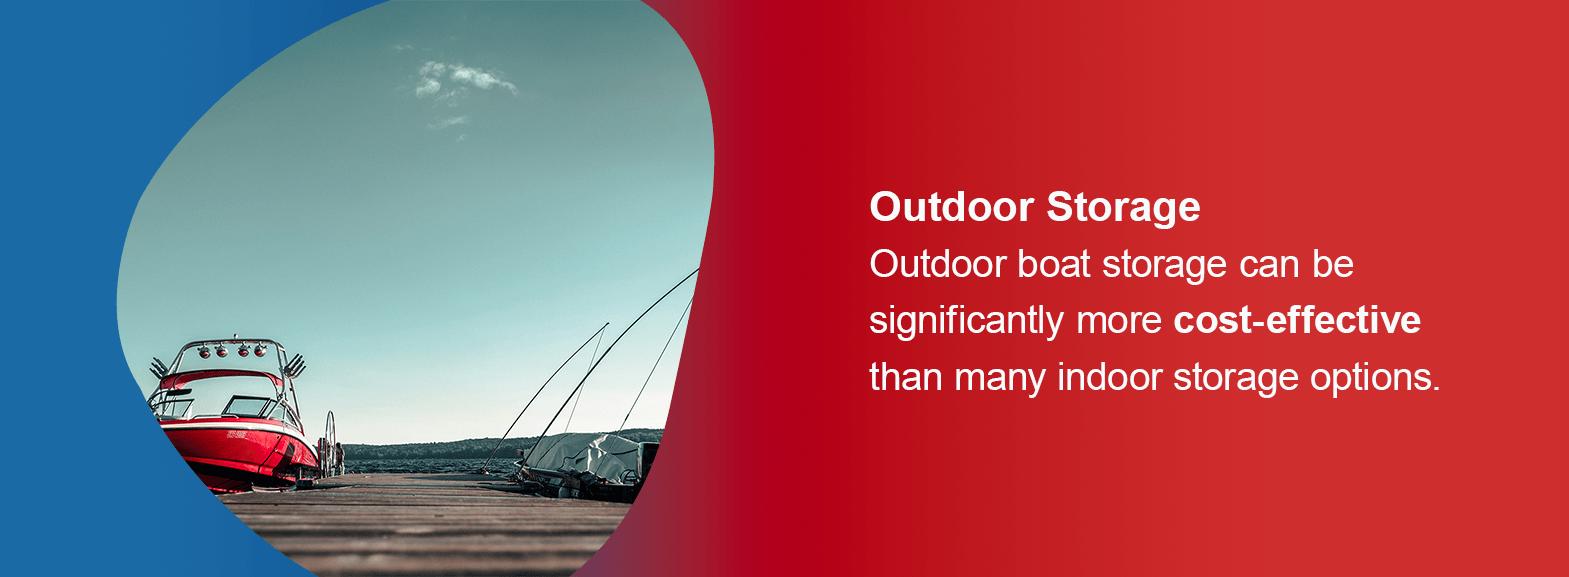 Outdoor Storage - Outdoor boat storage can be significantly more cost-effective than many indoor storage options. 